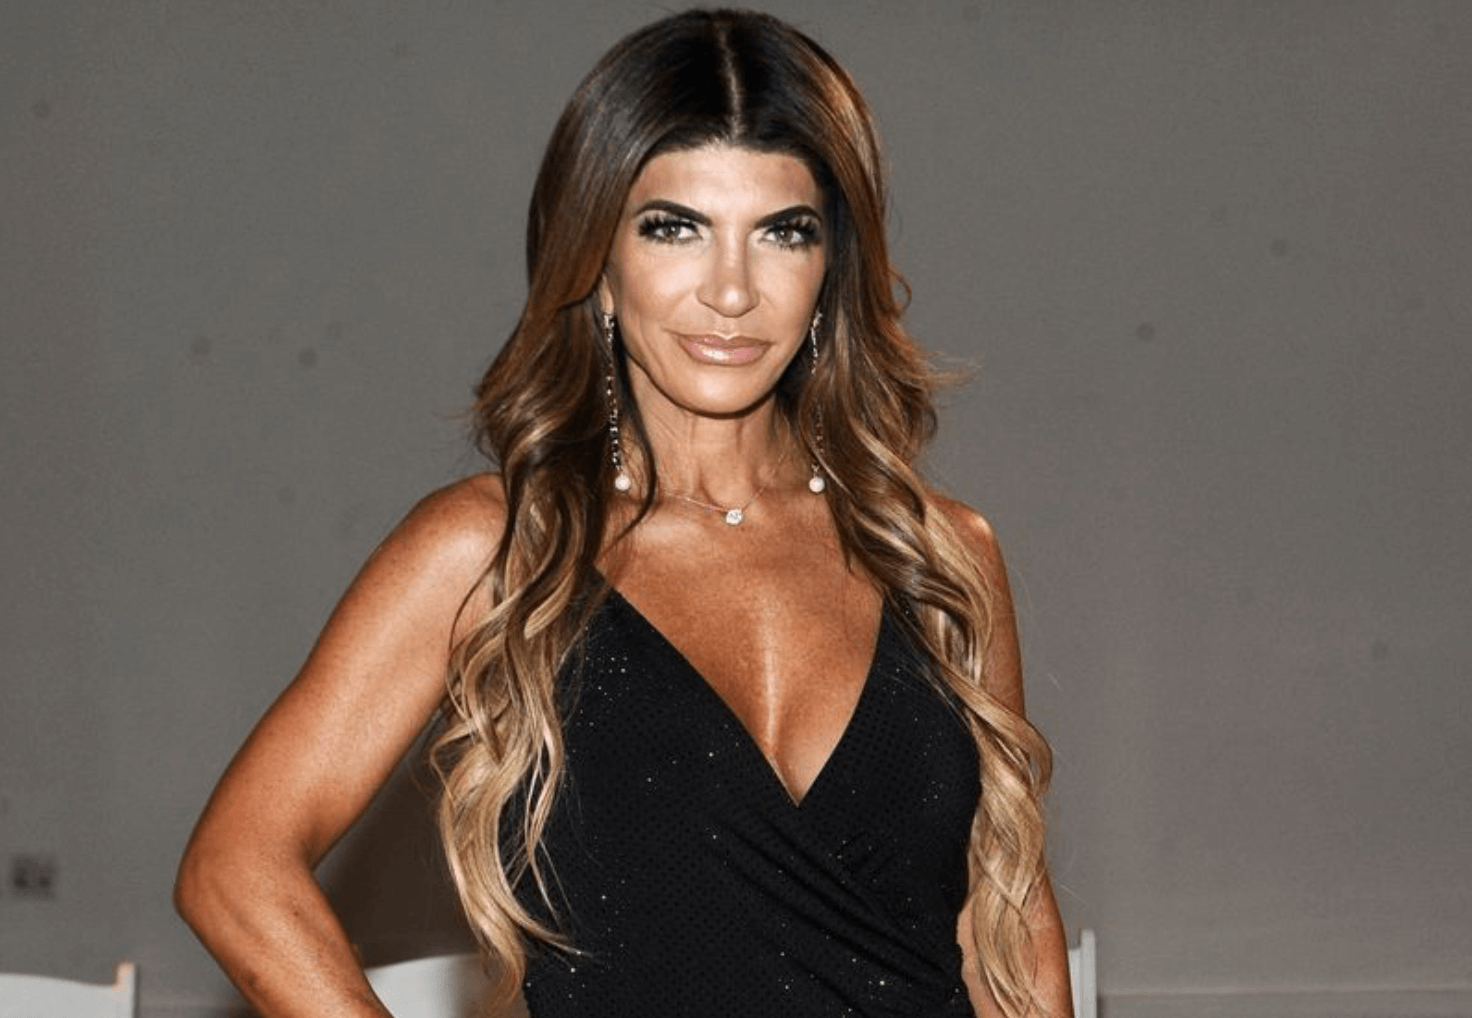 Twitter Drags Teresa Giudice Over Controversial Comments About Sexual Harassment